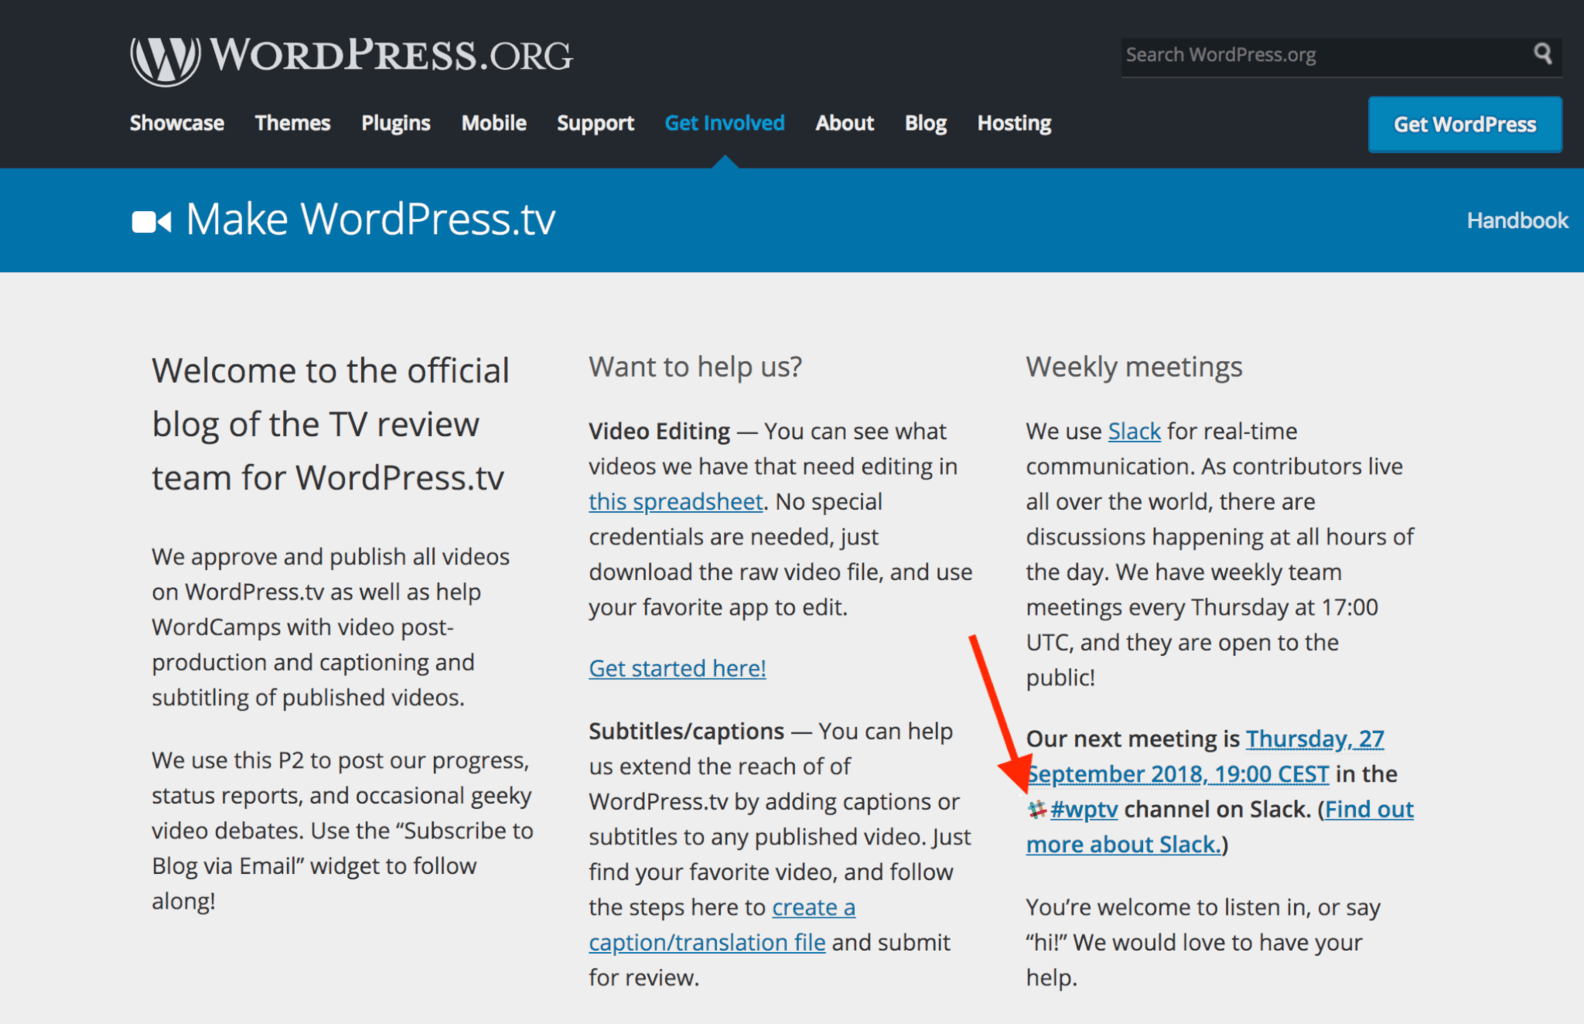 Contribute to WordPress: Becoming a WP Contributor in 3 Steps